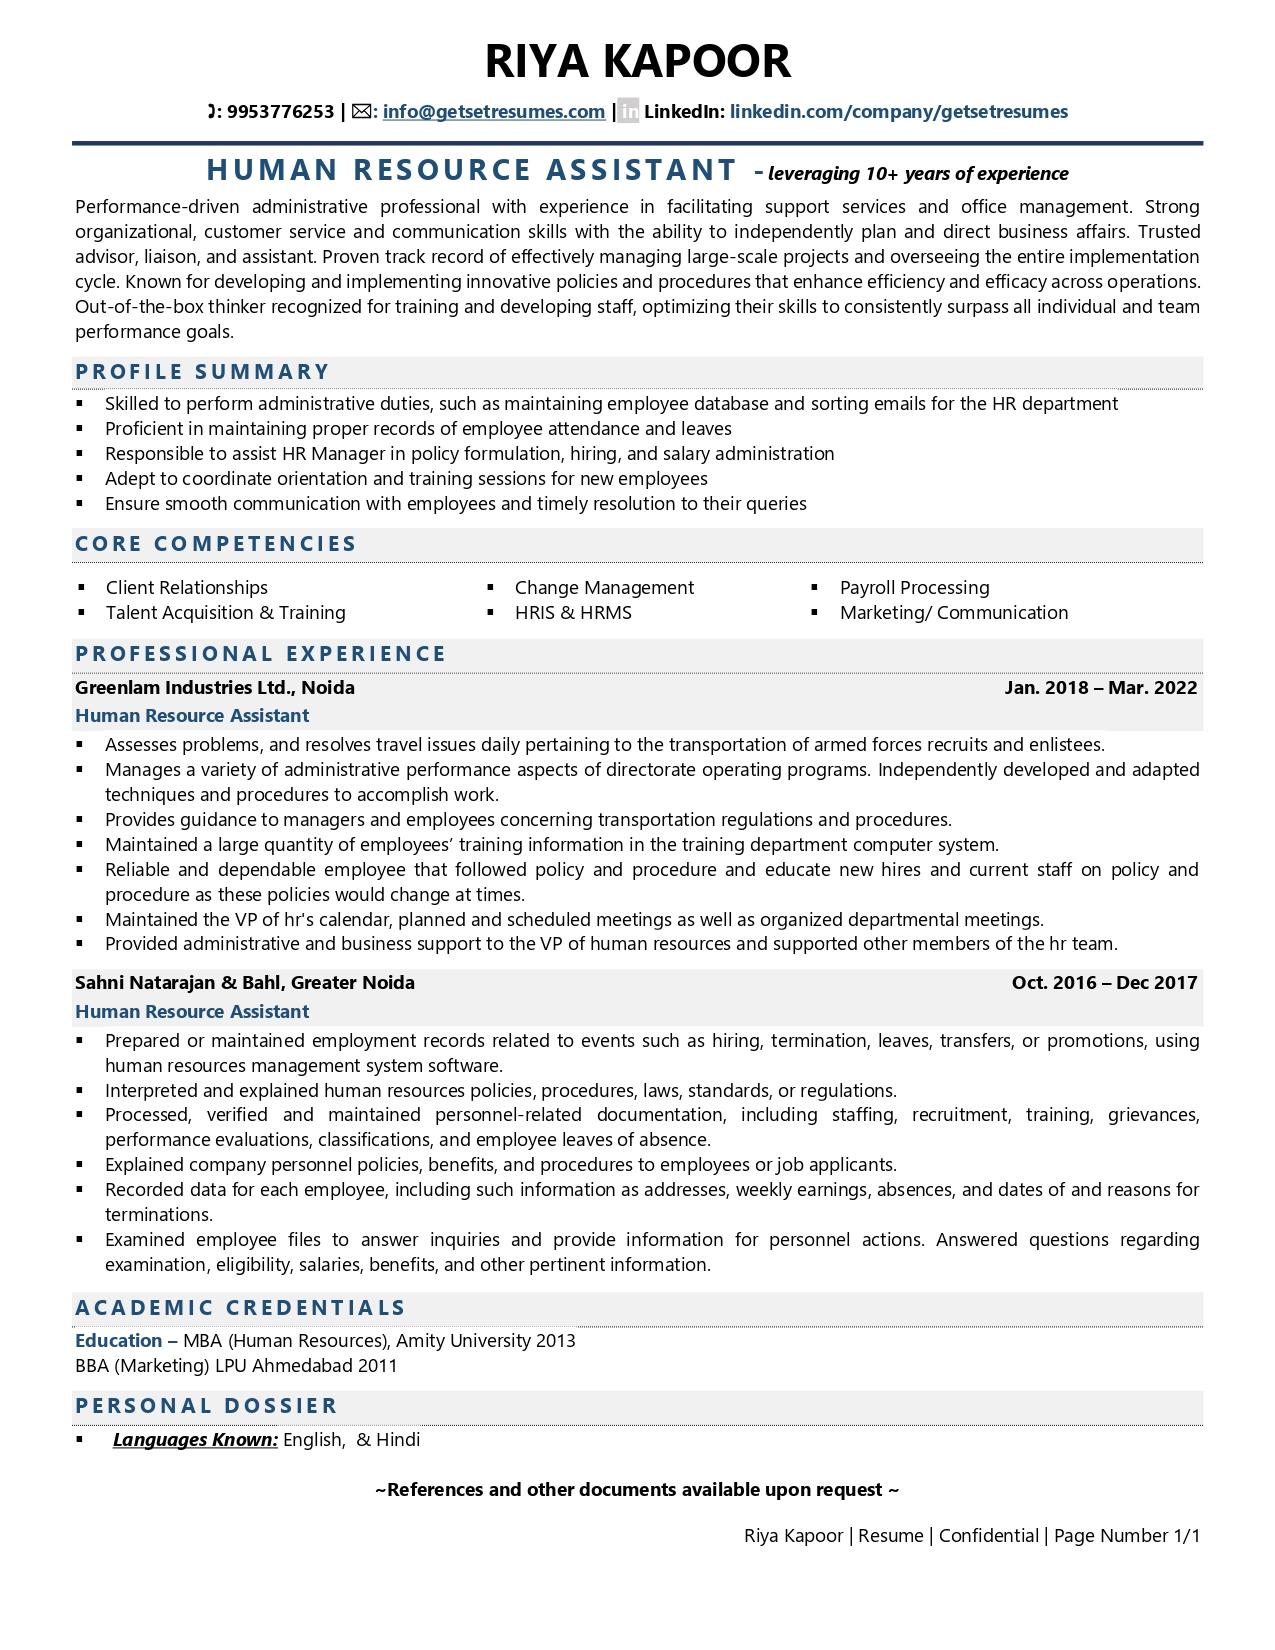 resume objective for human services